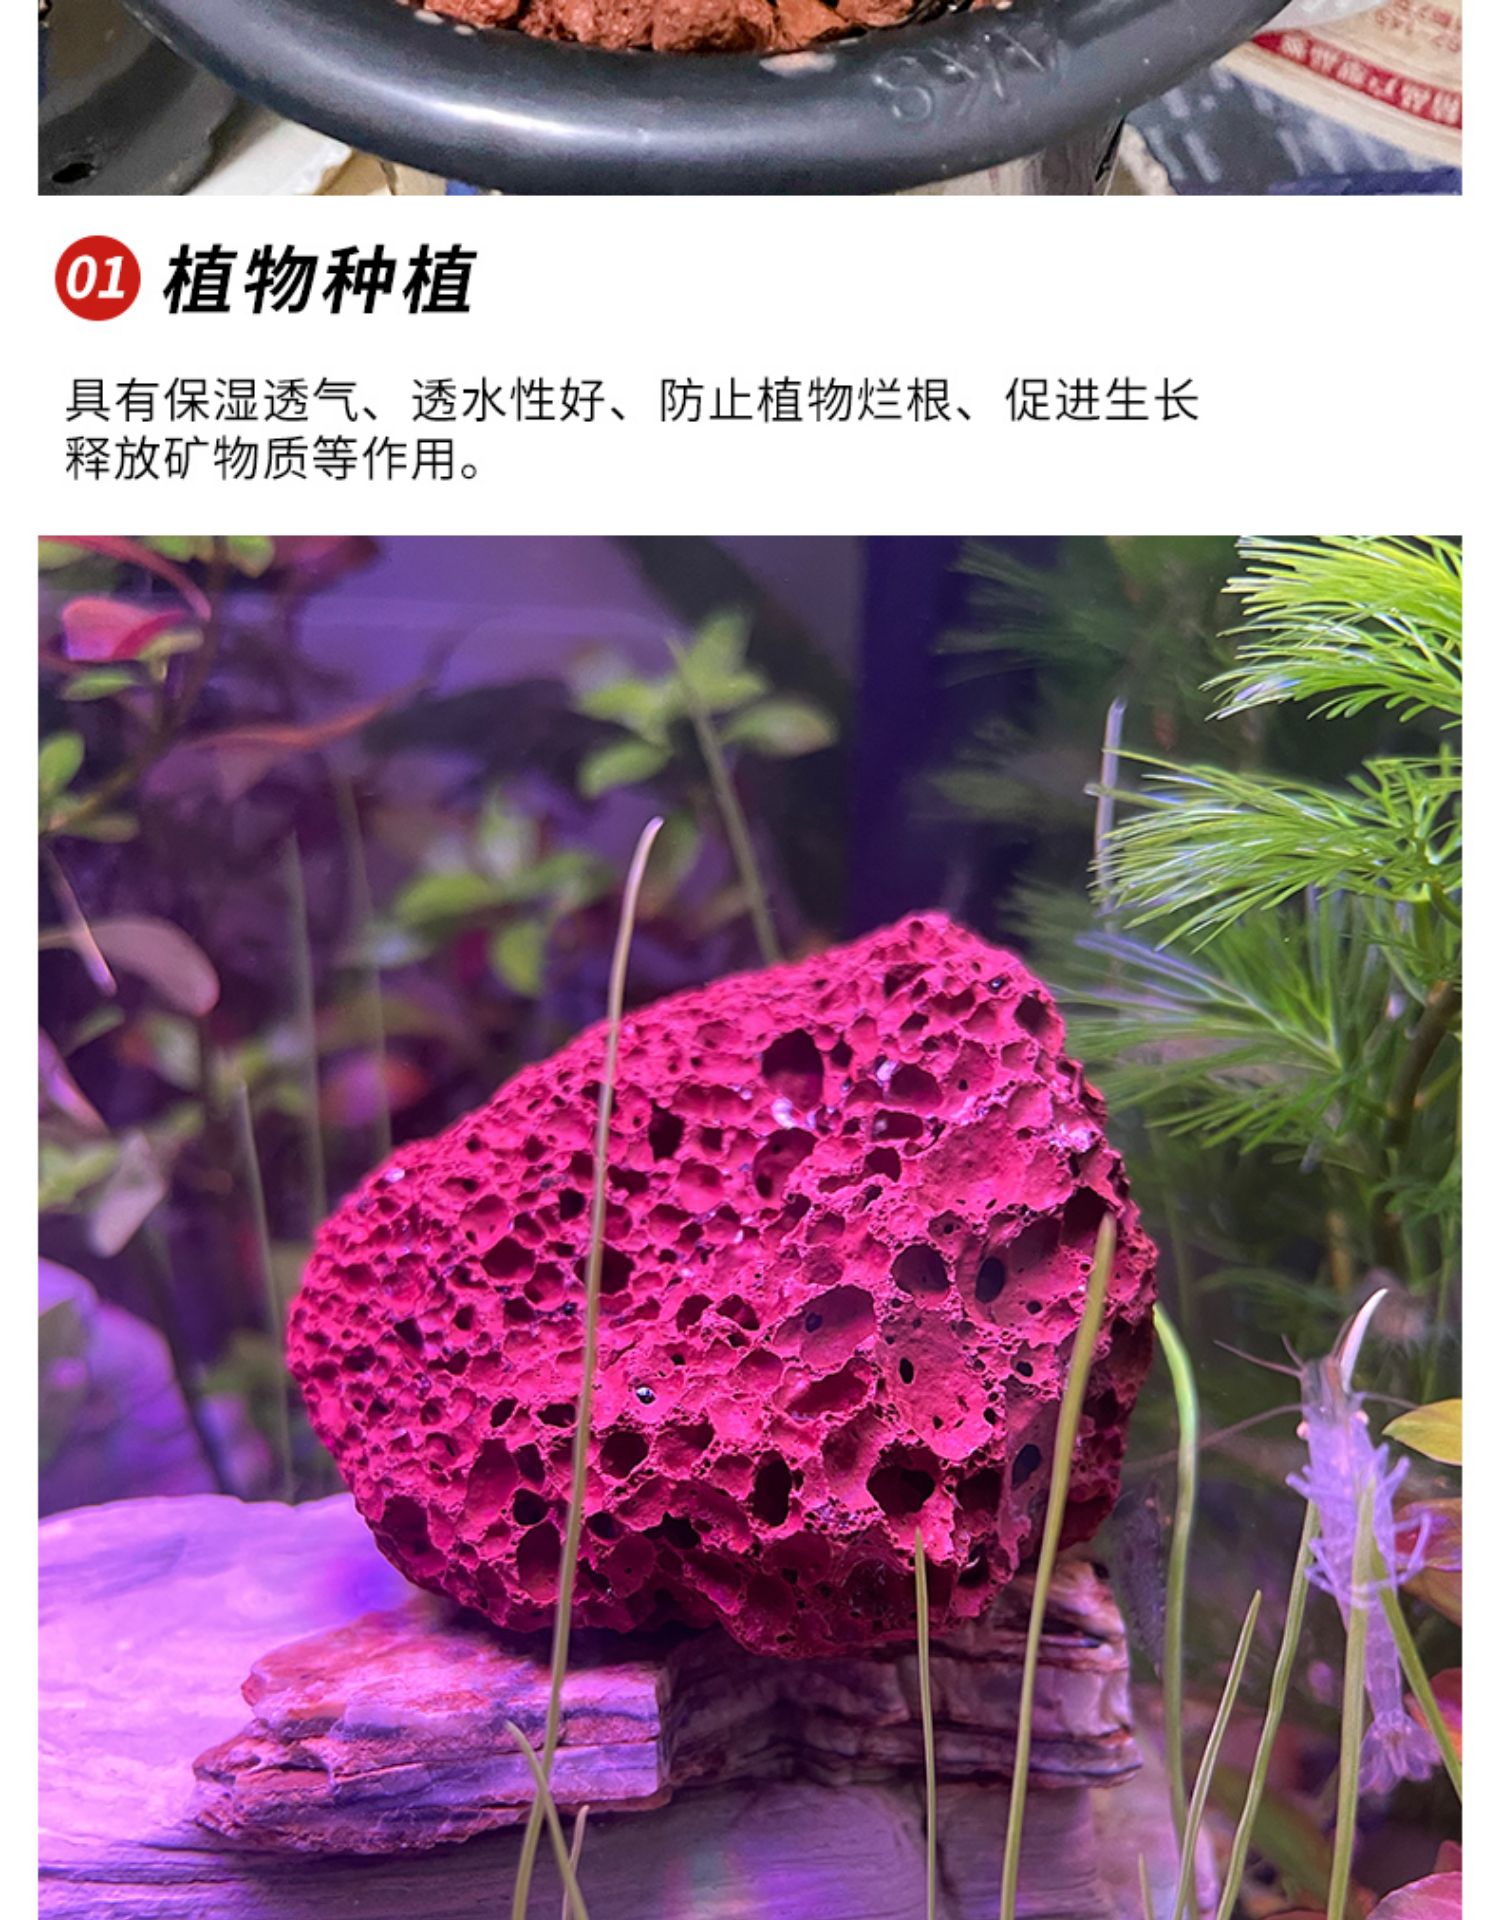 Anda Volcanic Stone Filter Material Fish Tank Landscaping with Meat Paving Red Porous Volcanic Rock 1-3mm